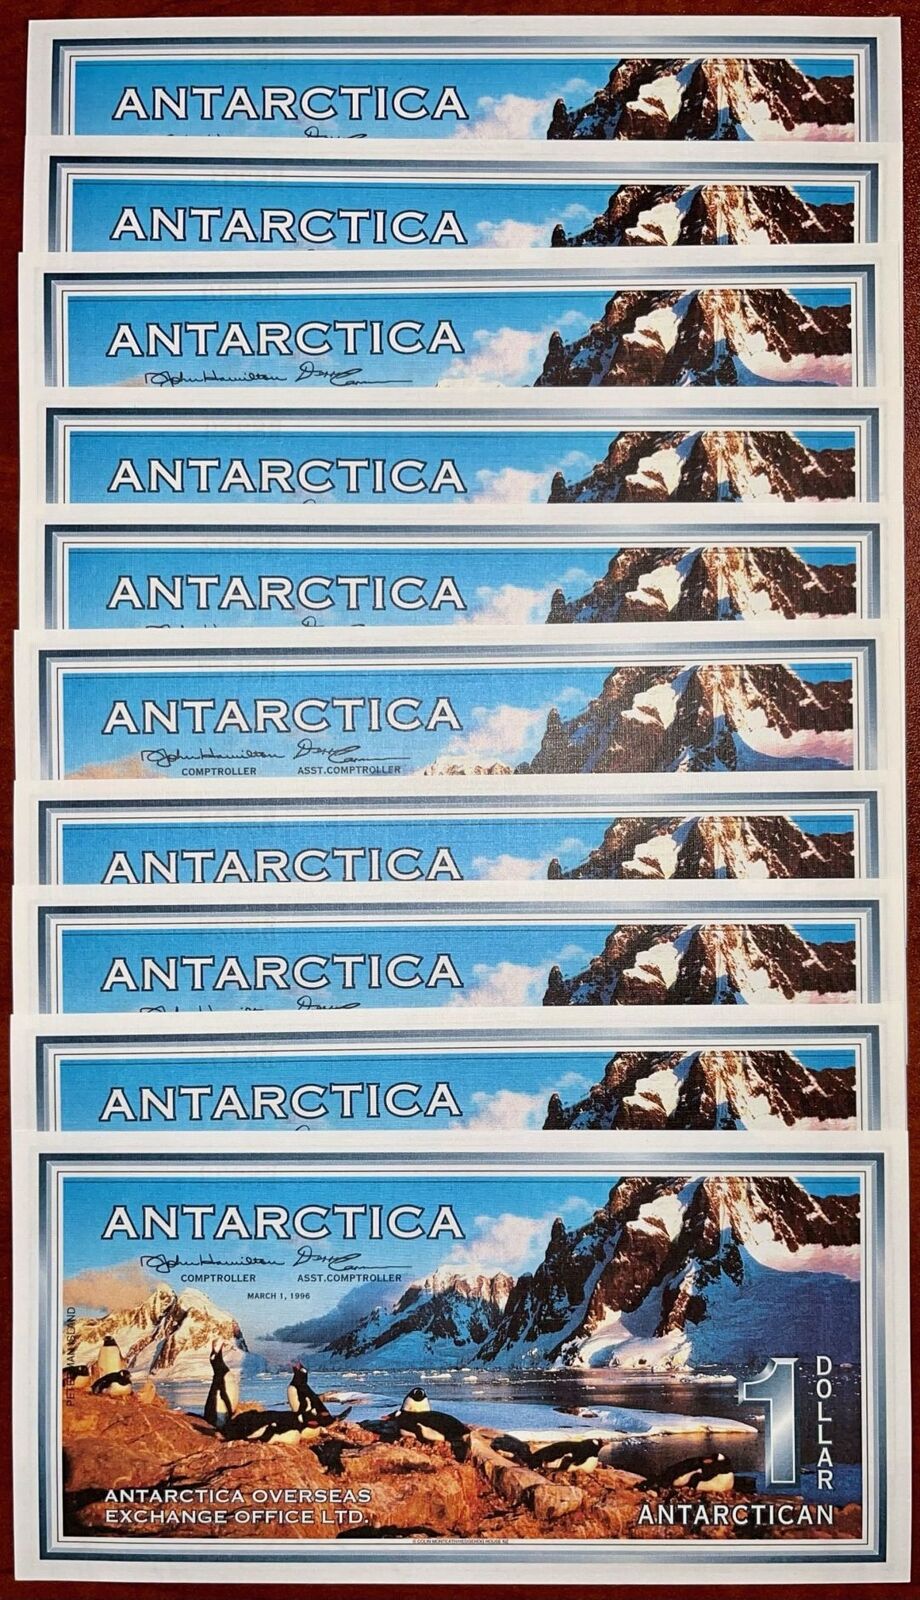 Antarctica - 1 Antartican Dollar - Group of 10 notes - 1996 dated Foreign Paper 